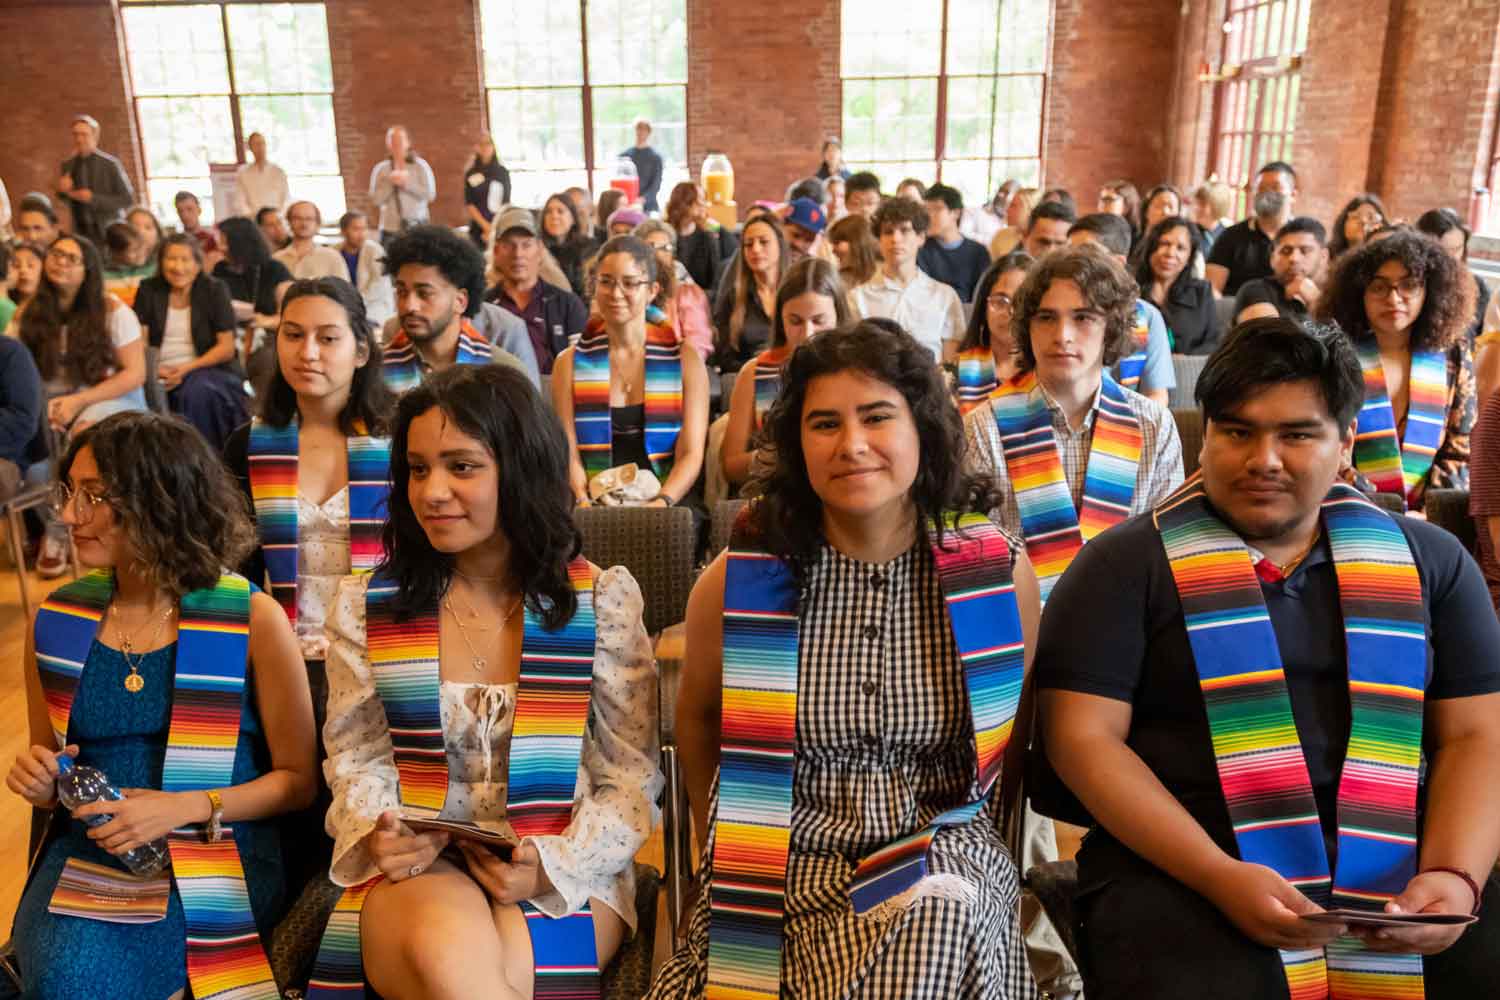 seated people at ceremony smiling and wearing multicolored stoles